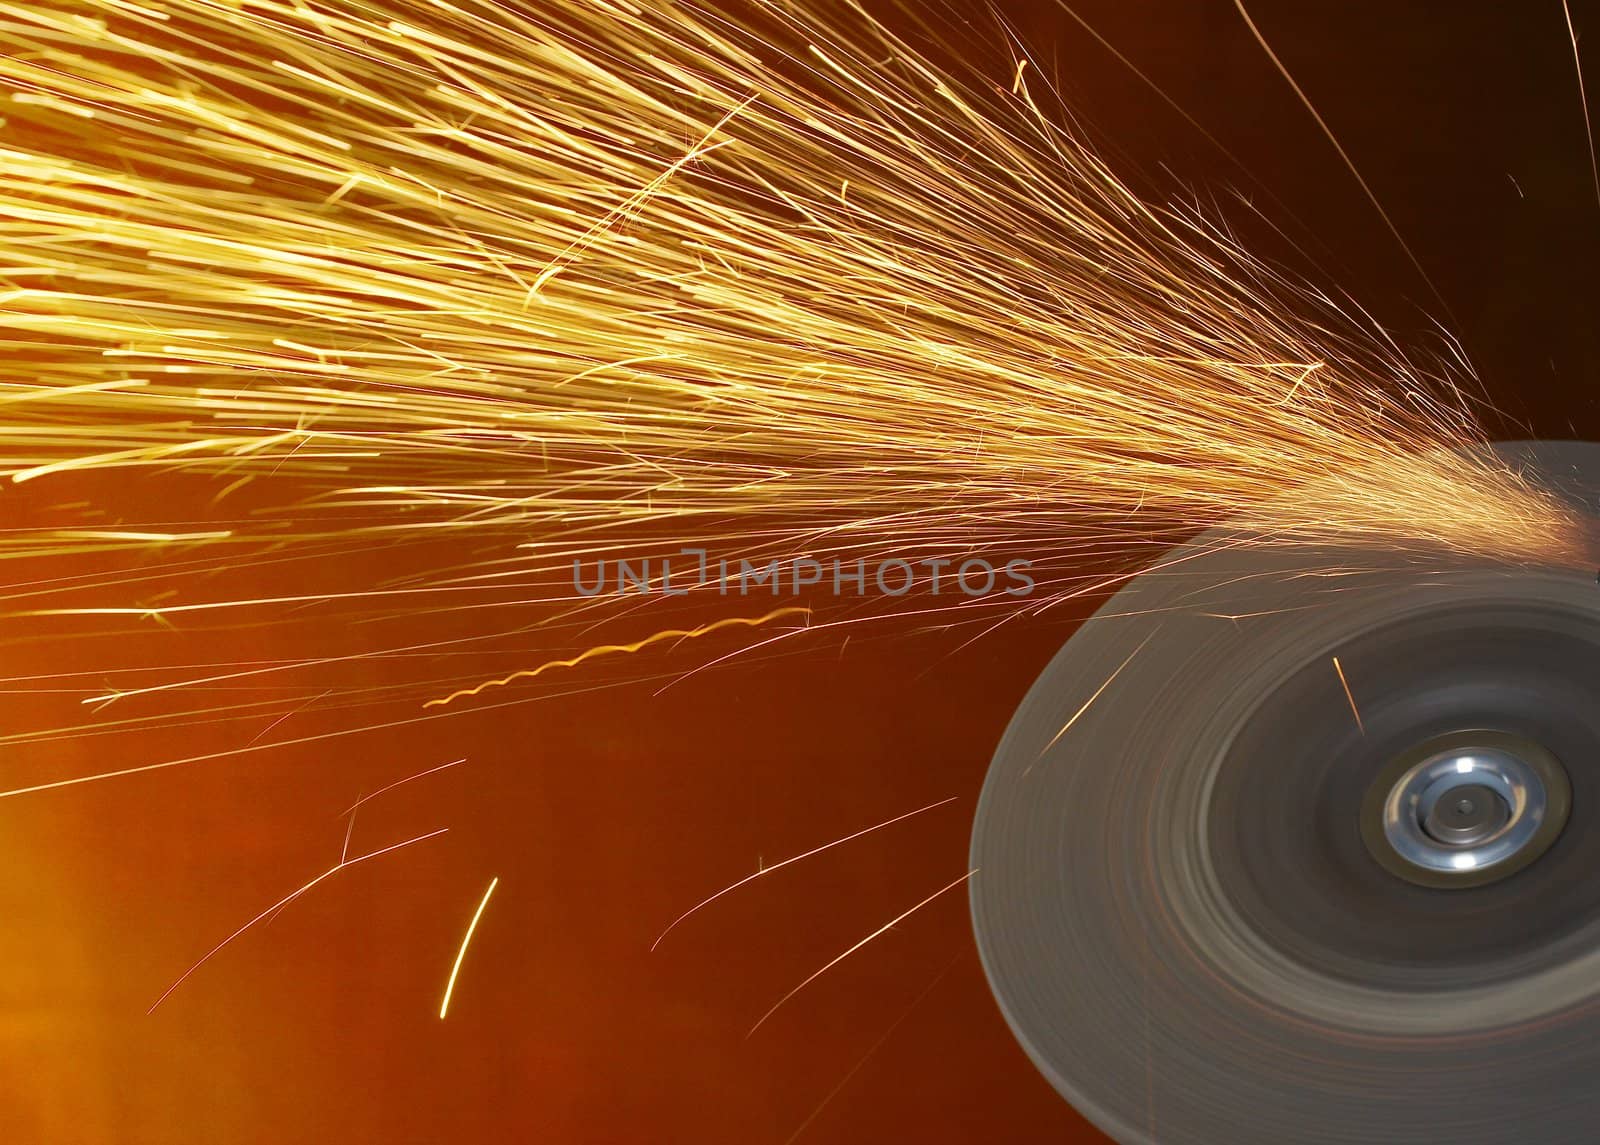 a close up picture of sparks on a grinding wheel